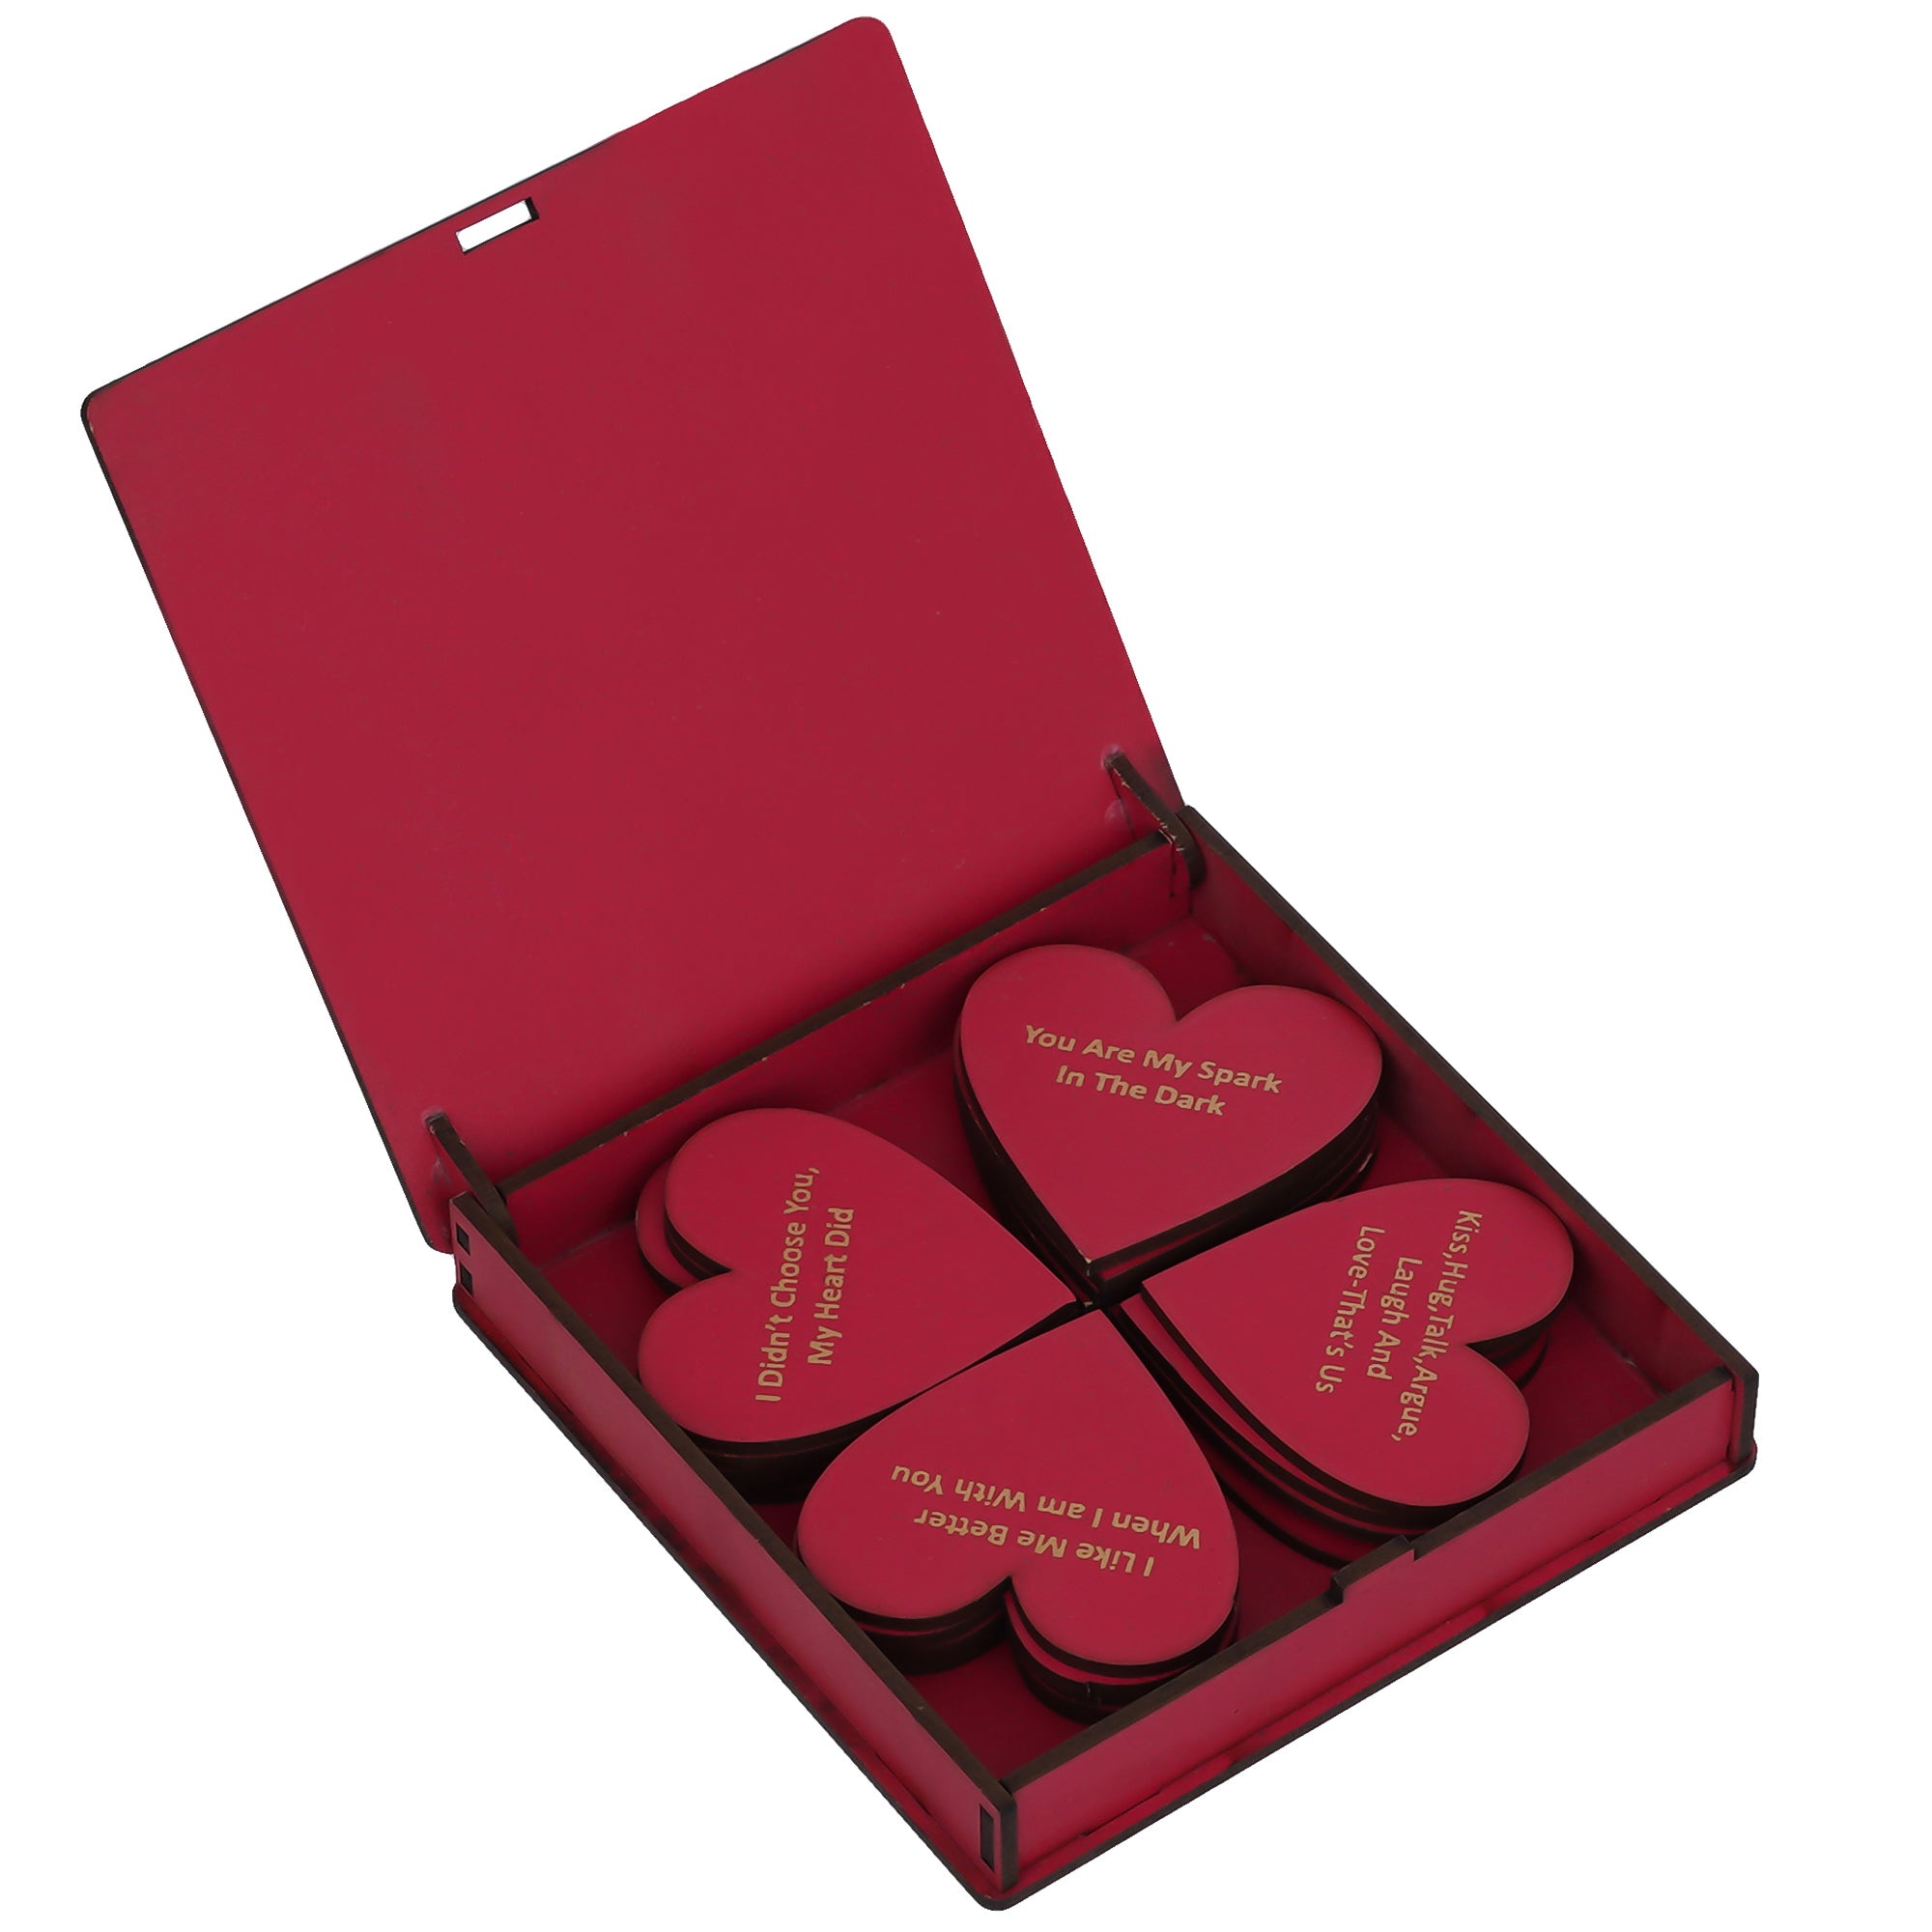 Valentine Combo of Golden Rose Gift Set, "20 Reasons Why I Love You" Printed on Little Red Hearts Decorative Wooden Gift Set Box 6